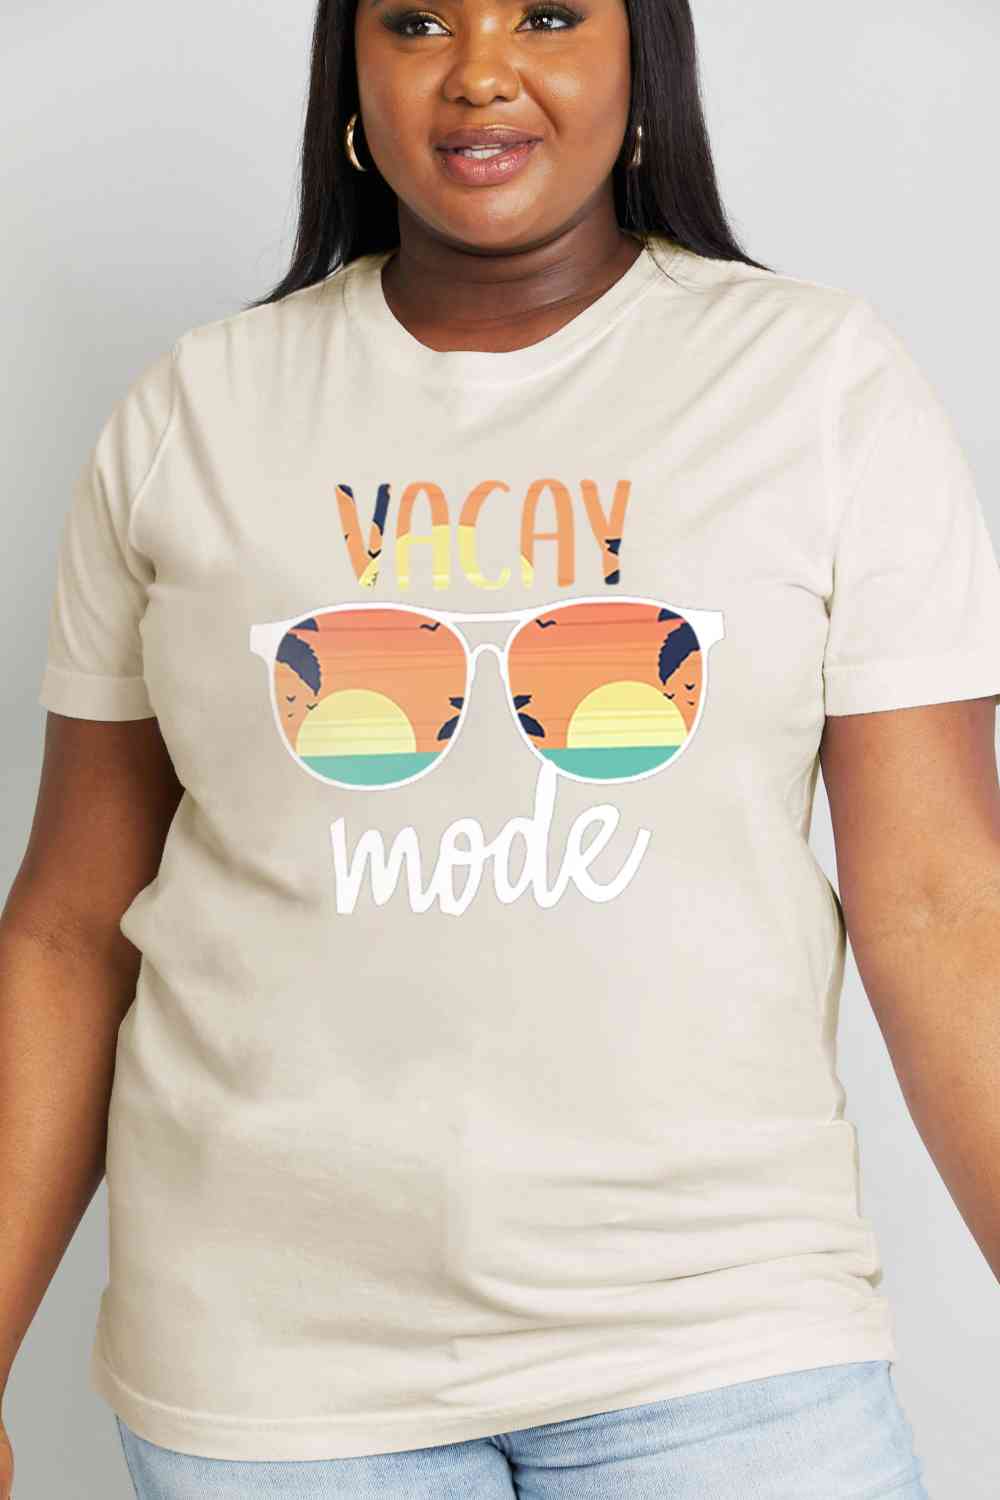 Simply Love Full Size VACAY MODE Graphic Cotton Tee